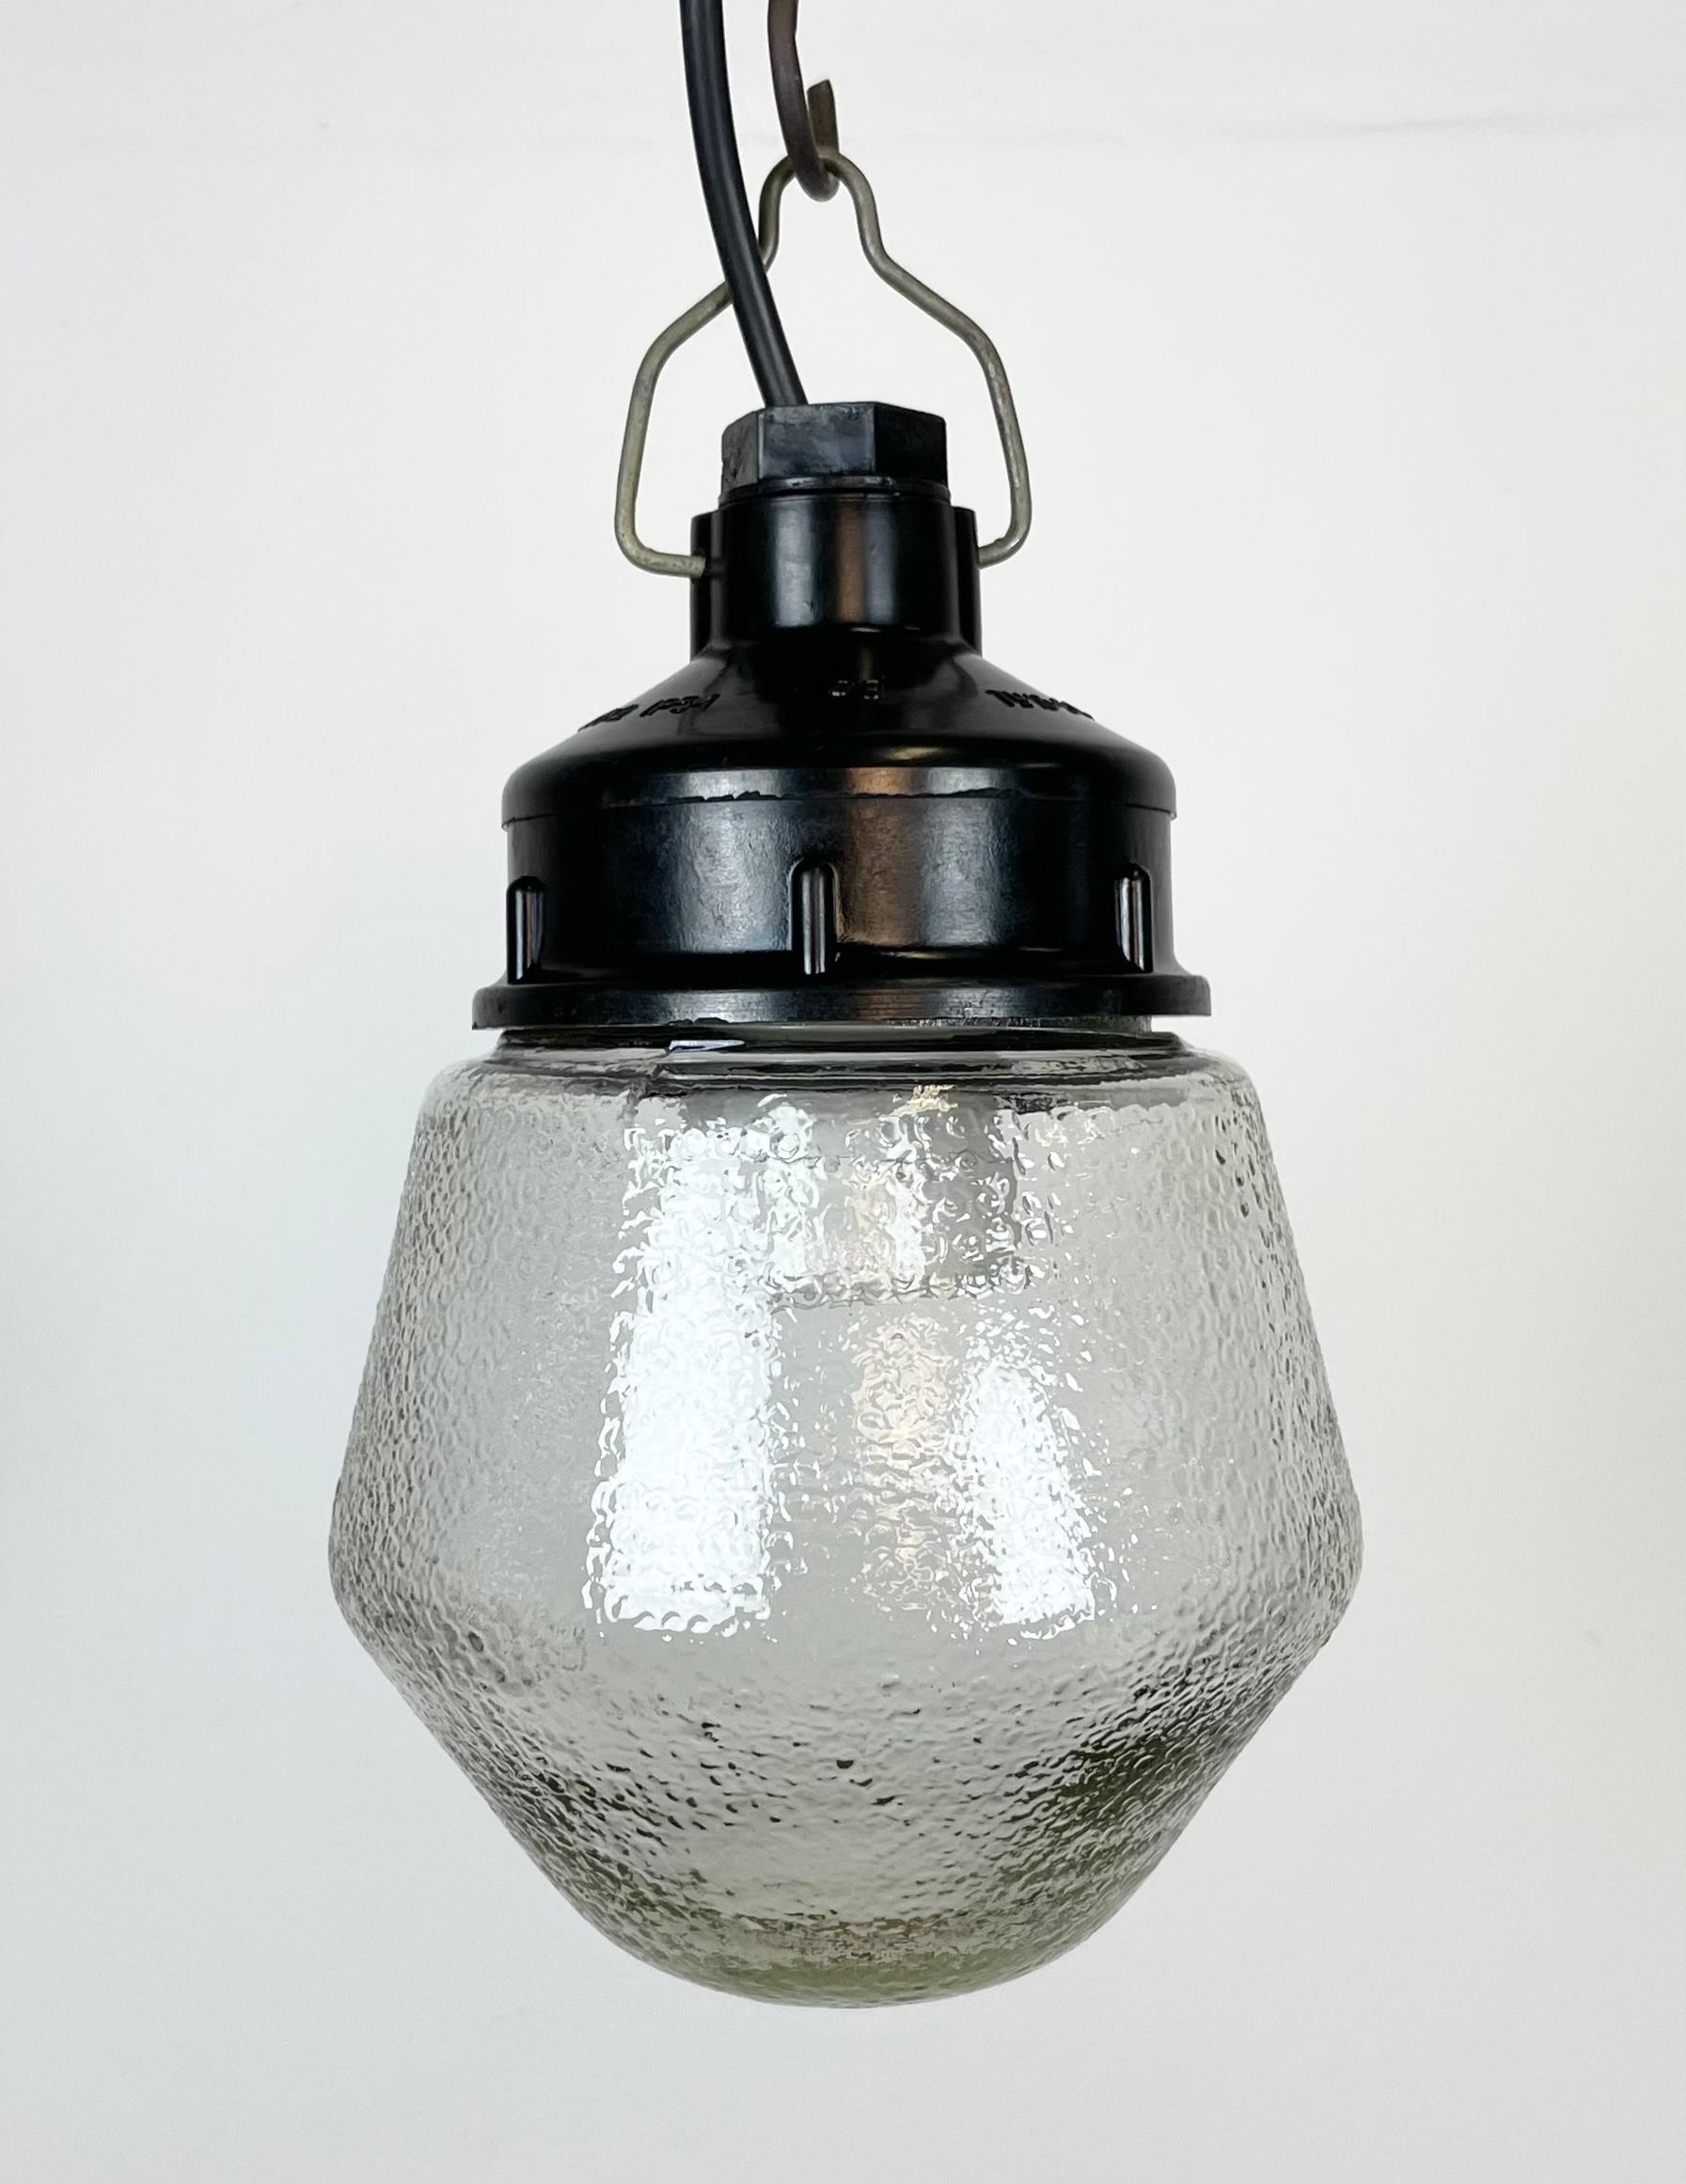 Russian Industrial Bakelite Pendant Light with Frosted Glass, 1970s For Sale